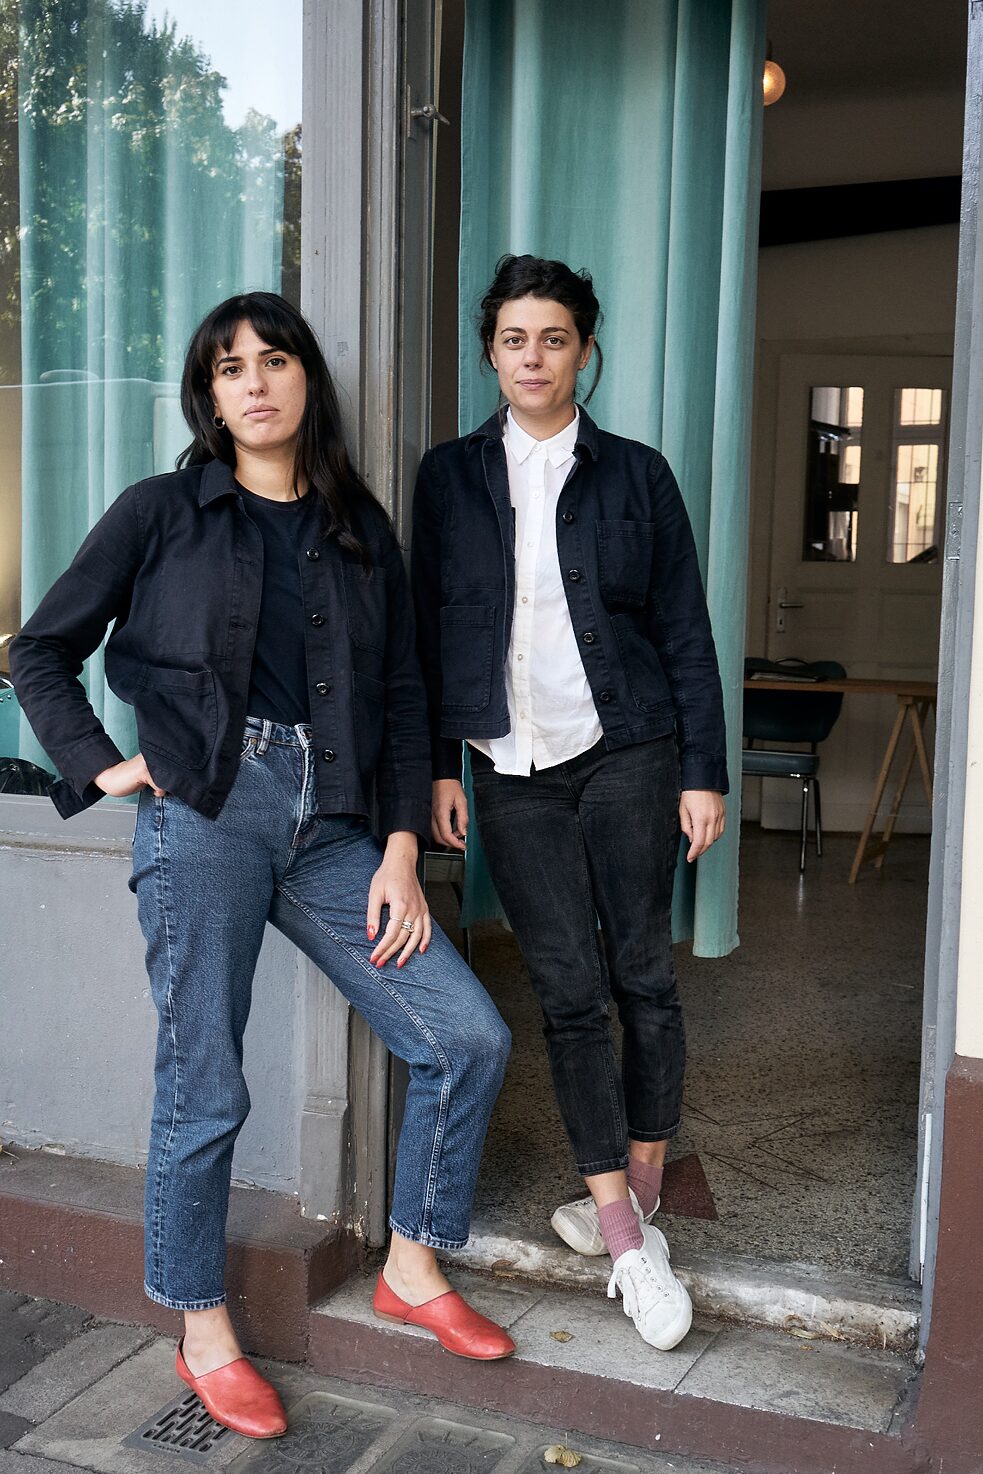 Portrait of Replika Publishing co-directors Youvalle Levy and Freya Copeland outside their Berlin studio in 2021